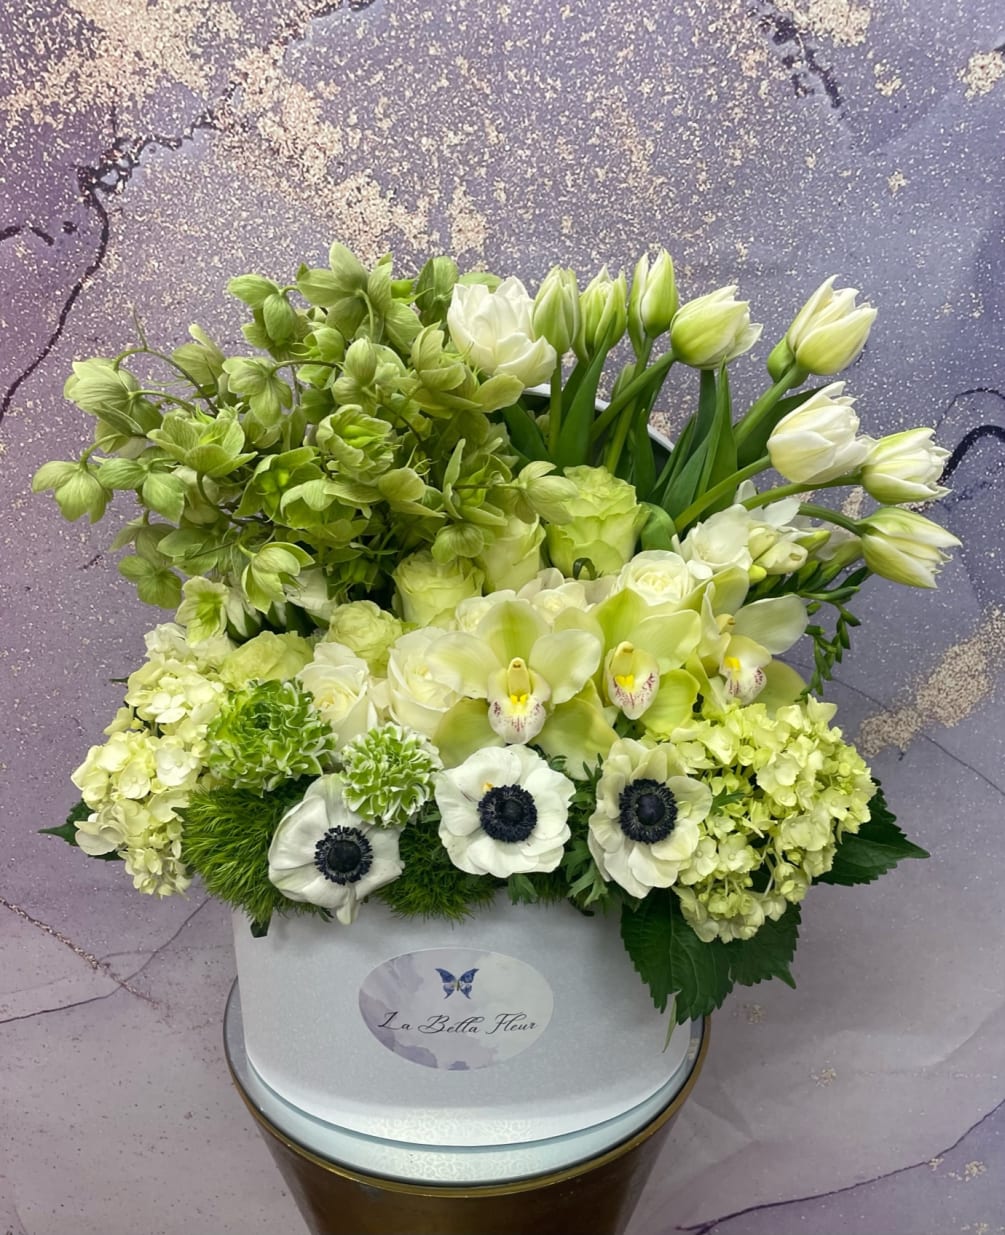 Box filled with sweet green and white flowers. Perfect for anyone loving